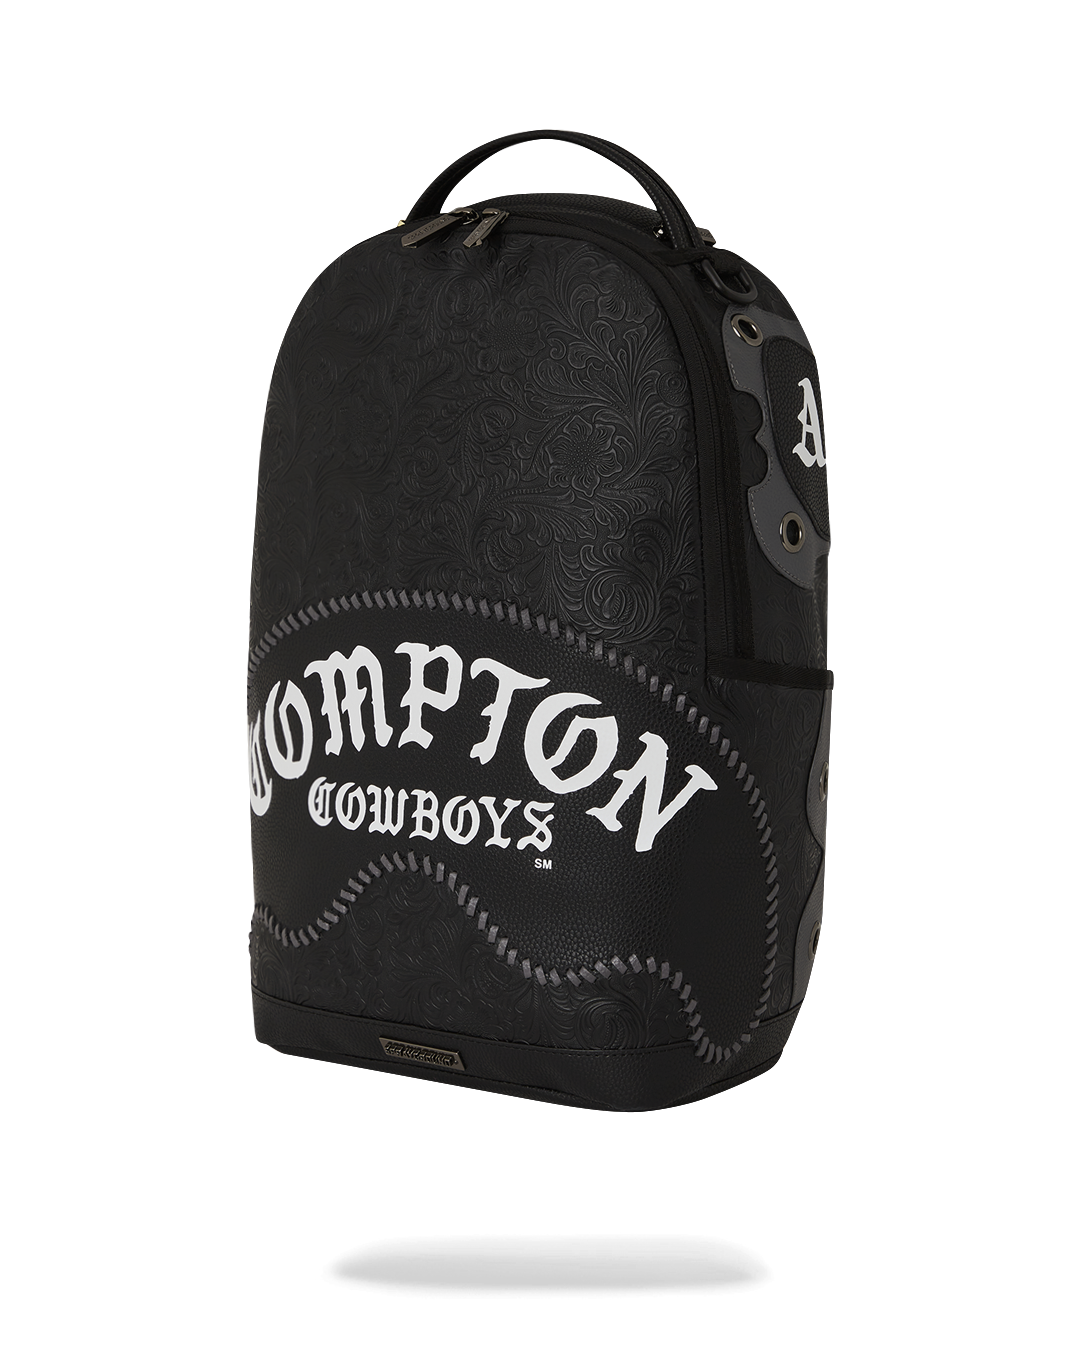 COMPTON COWBOYS WELCOME TO MY CITY BACKPACK